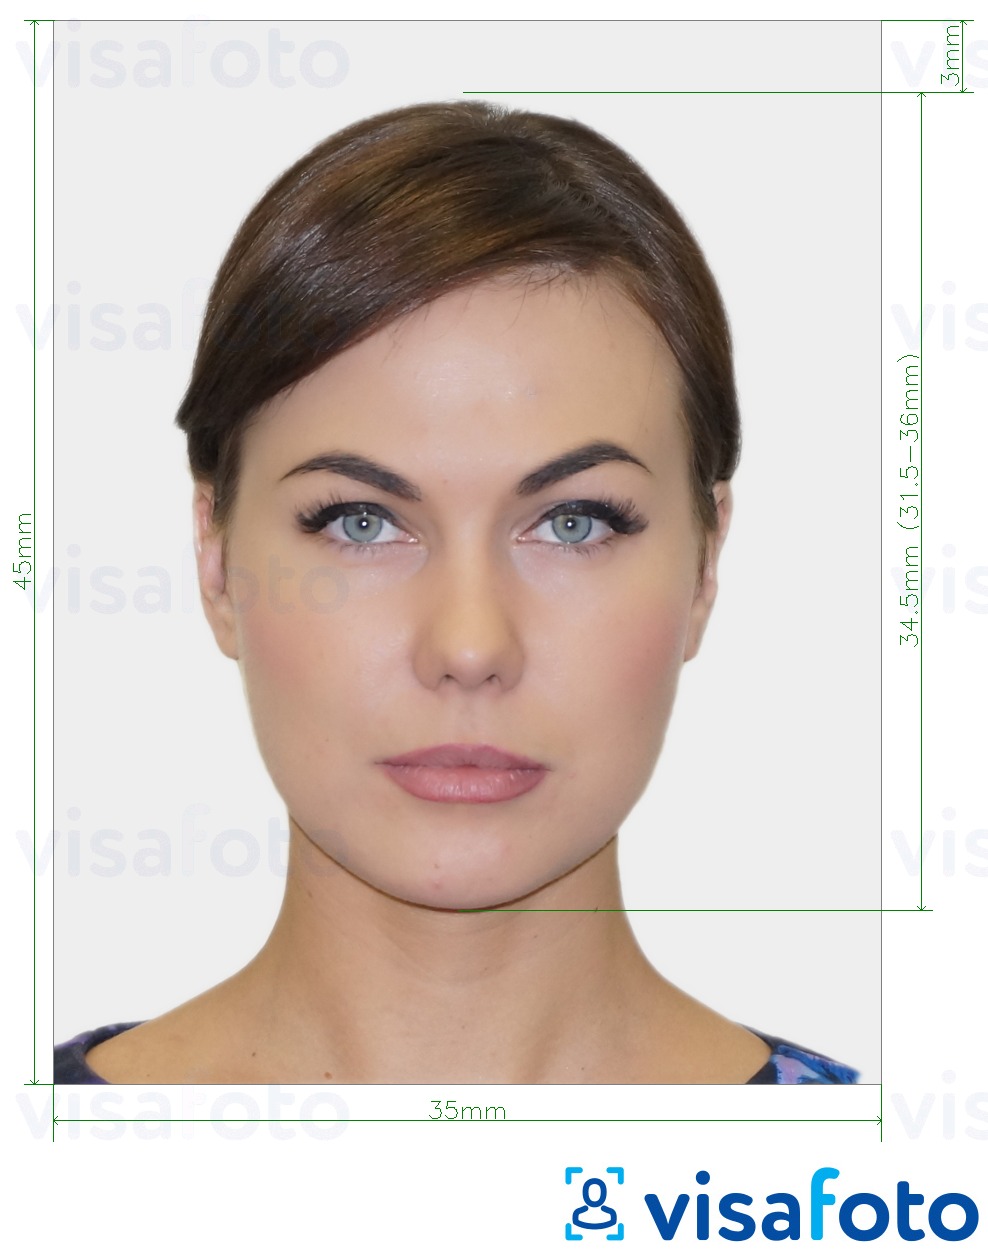 Example of photo for Austria Passport 35x45 mm (3.5x4.5 cm) with exact size specification